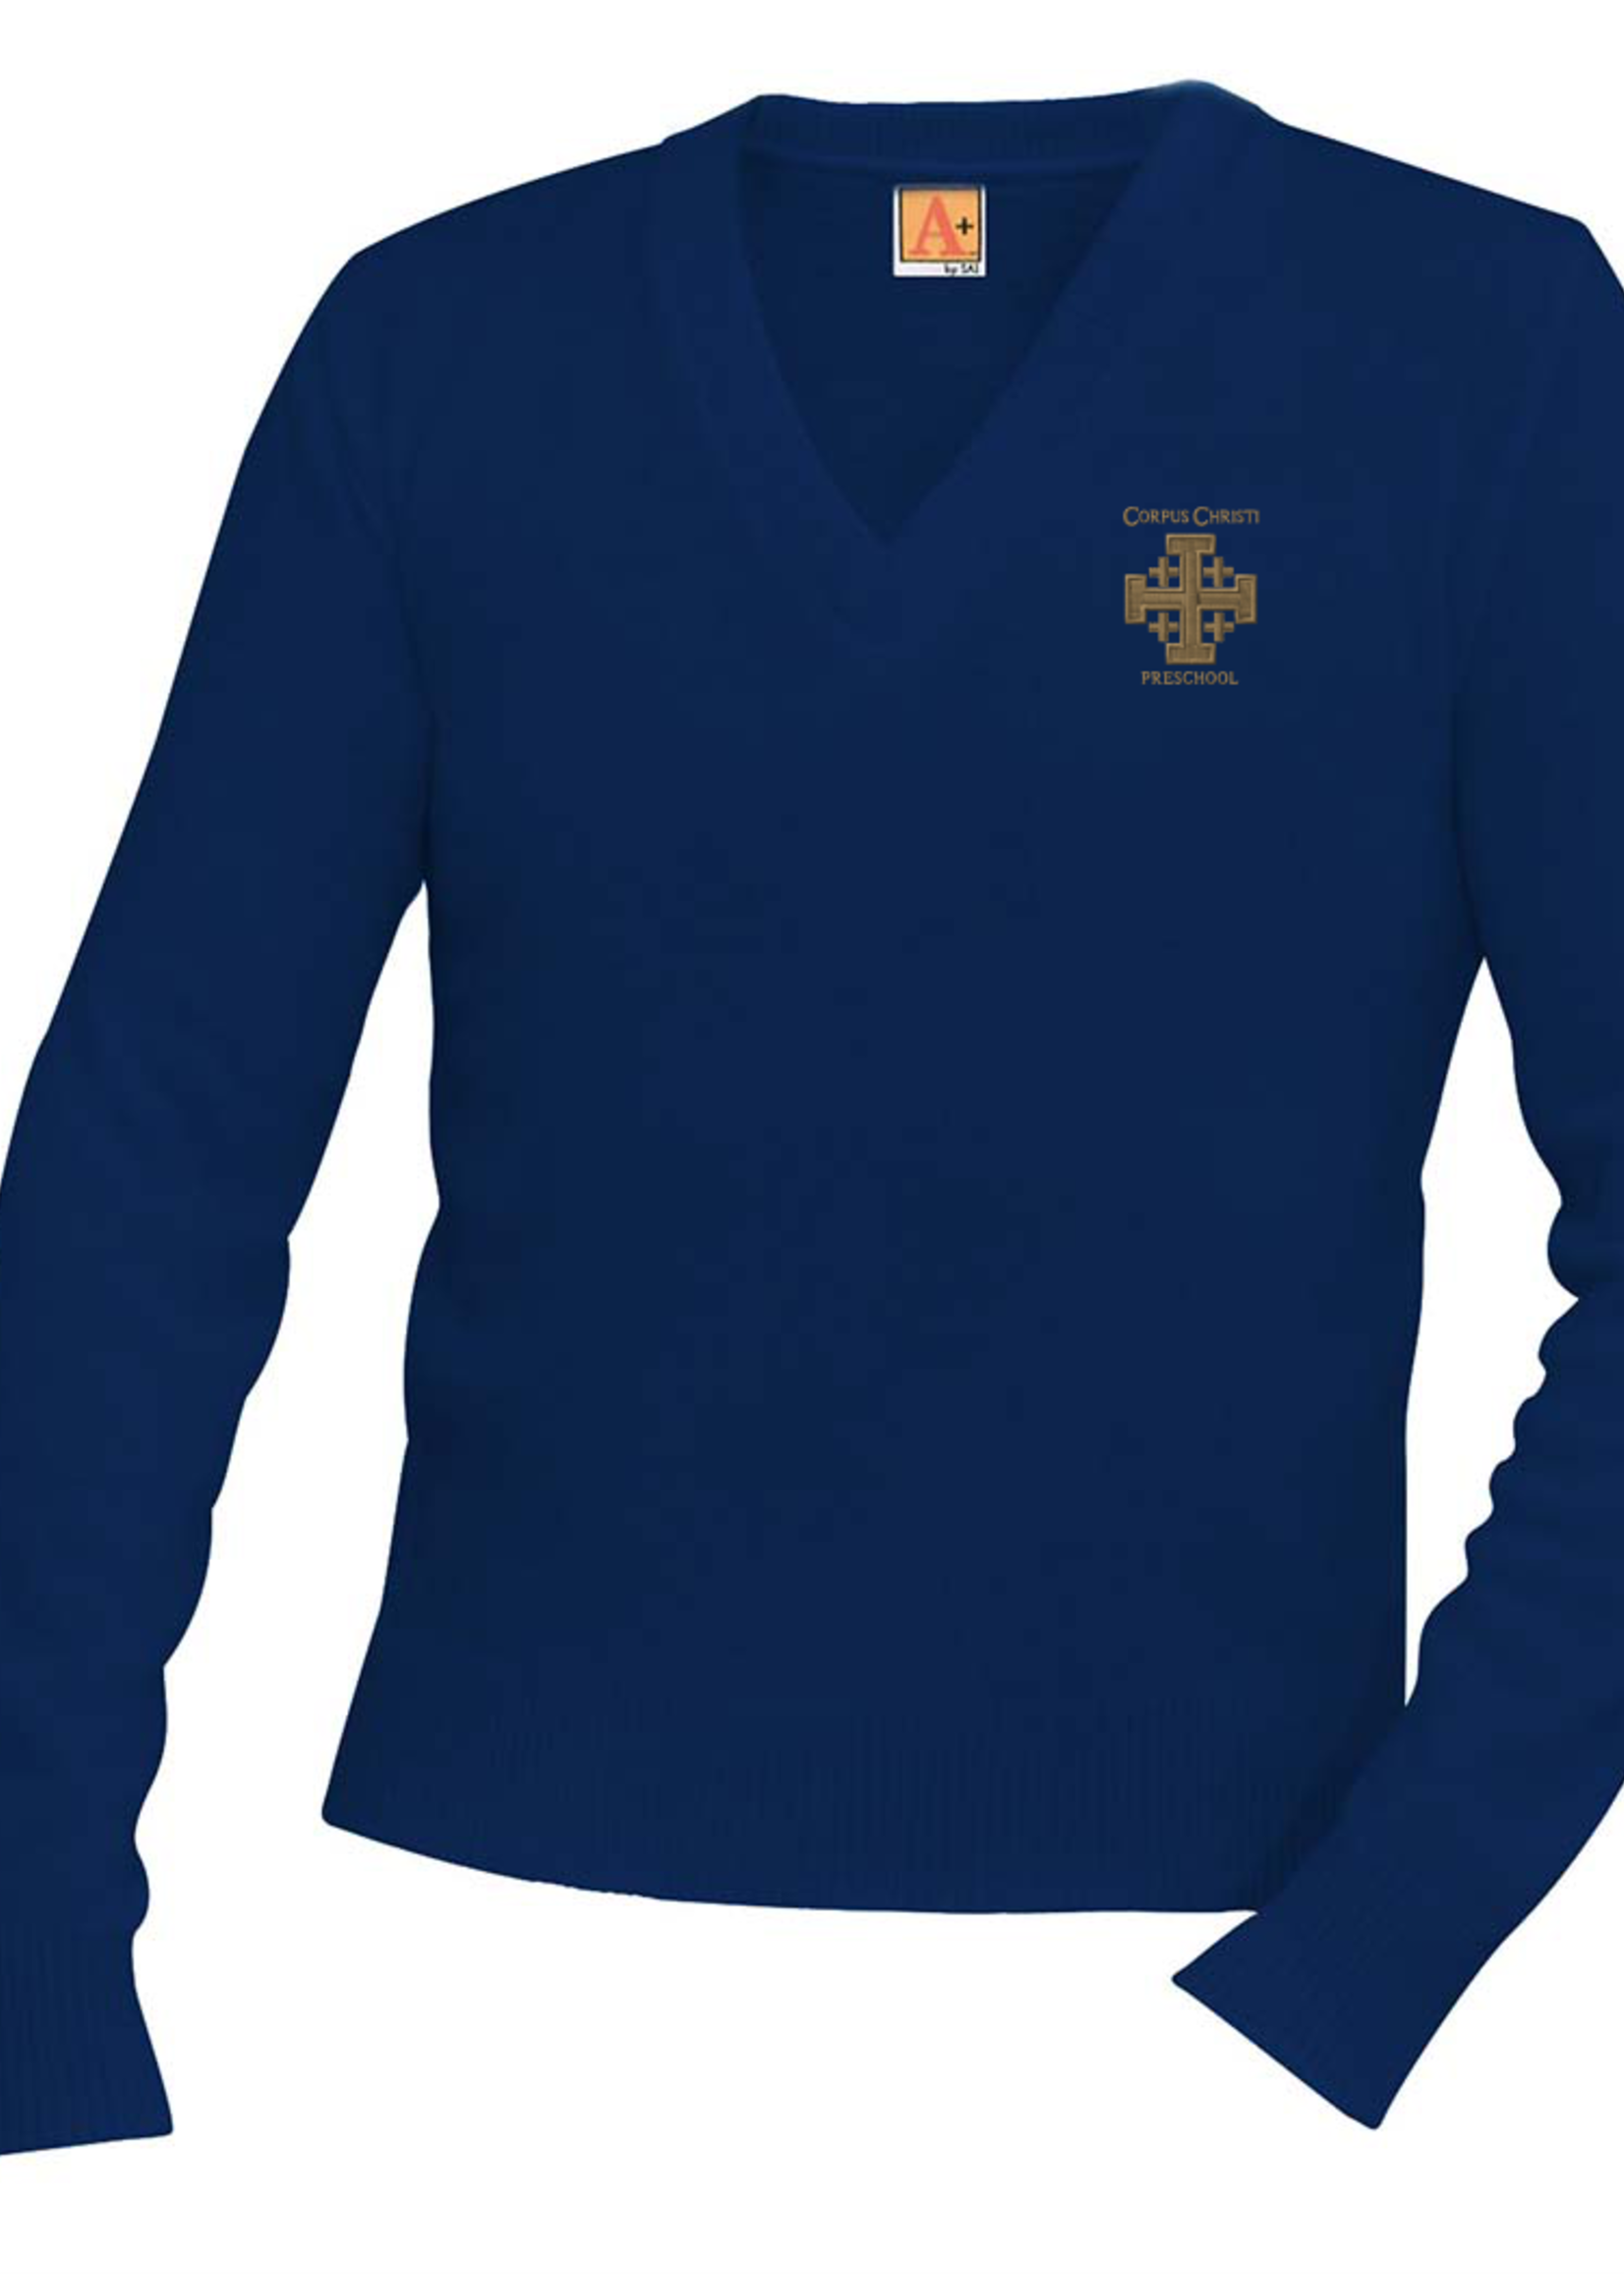 CCPS Navy V-neck Pullover sweater